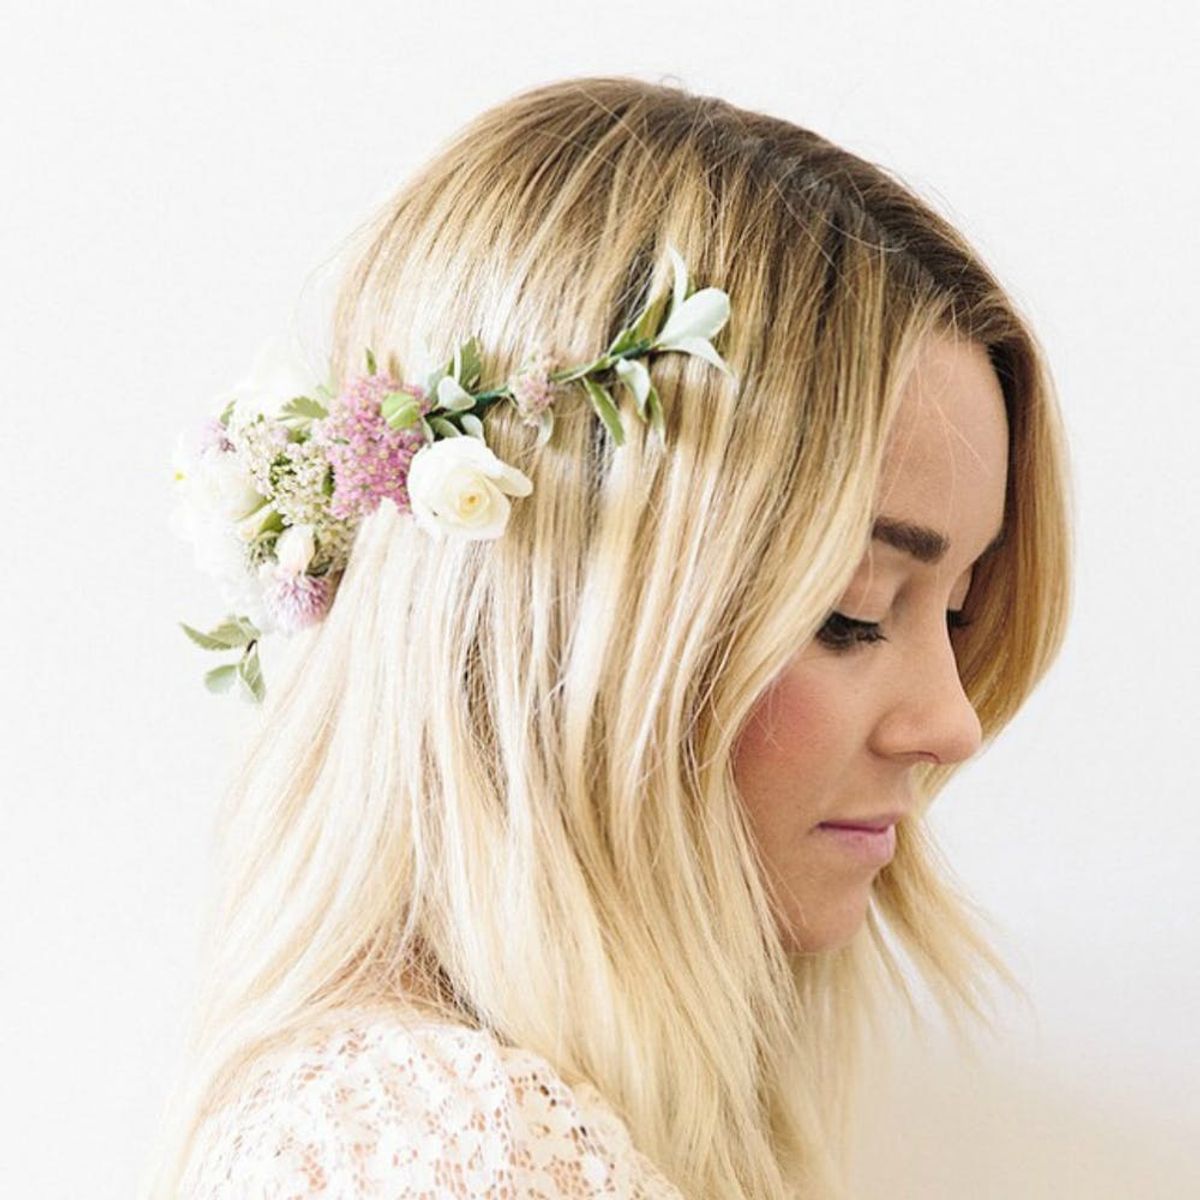 These Are Lauren Conrad’s Best Hairstyles of 2014